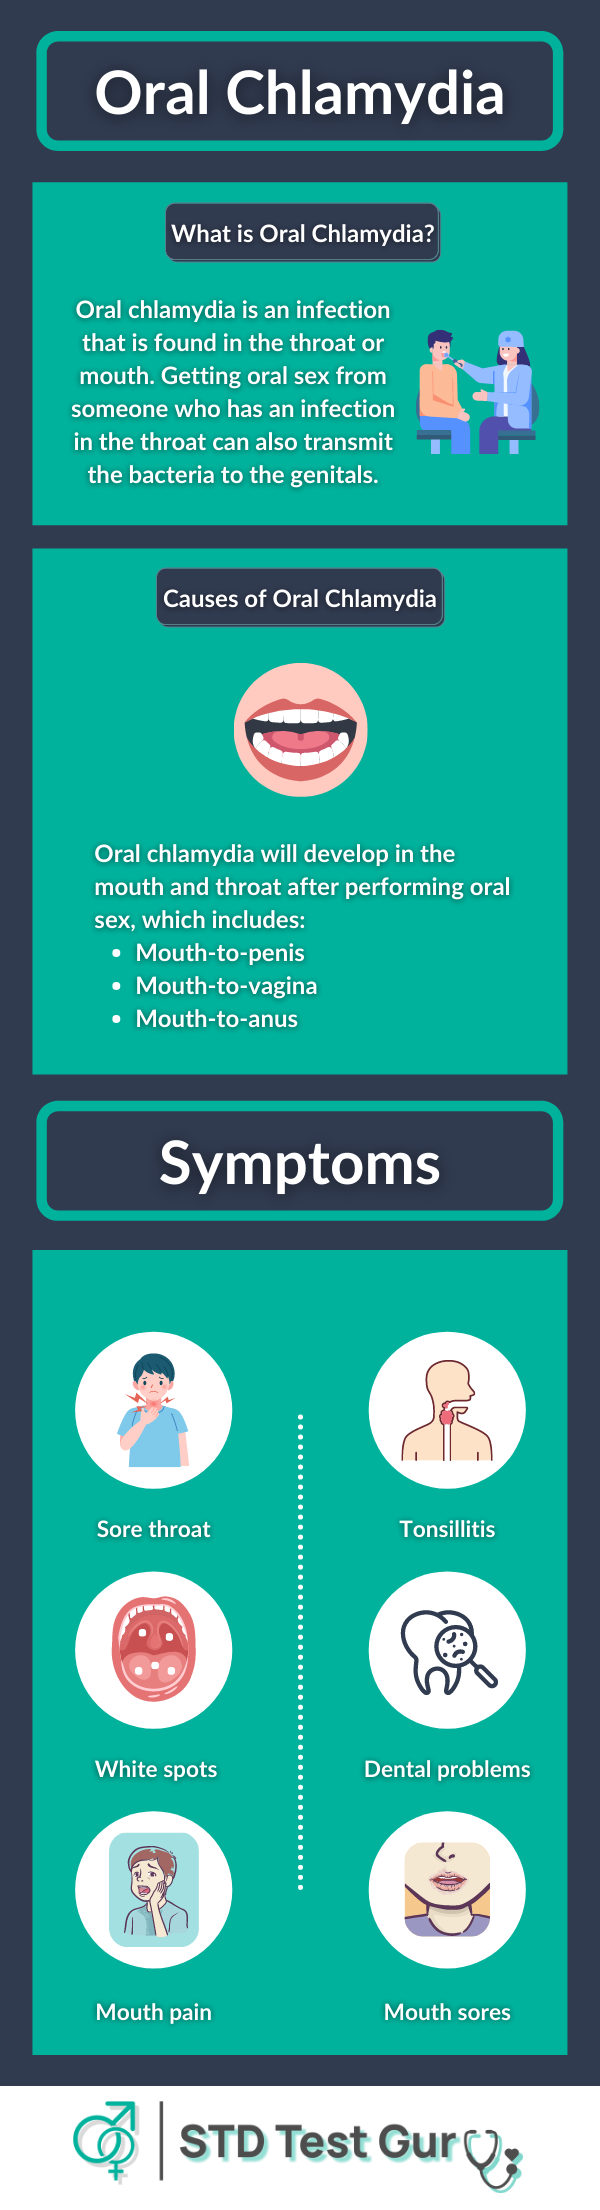 Oral Chlamydia: Causes and Symptoms